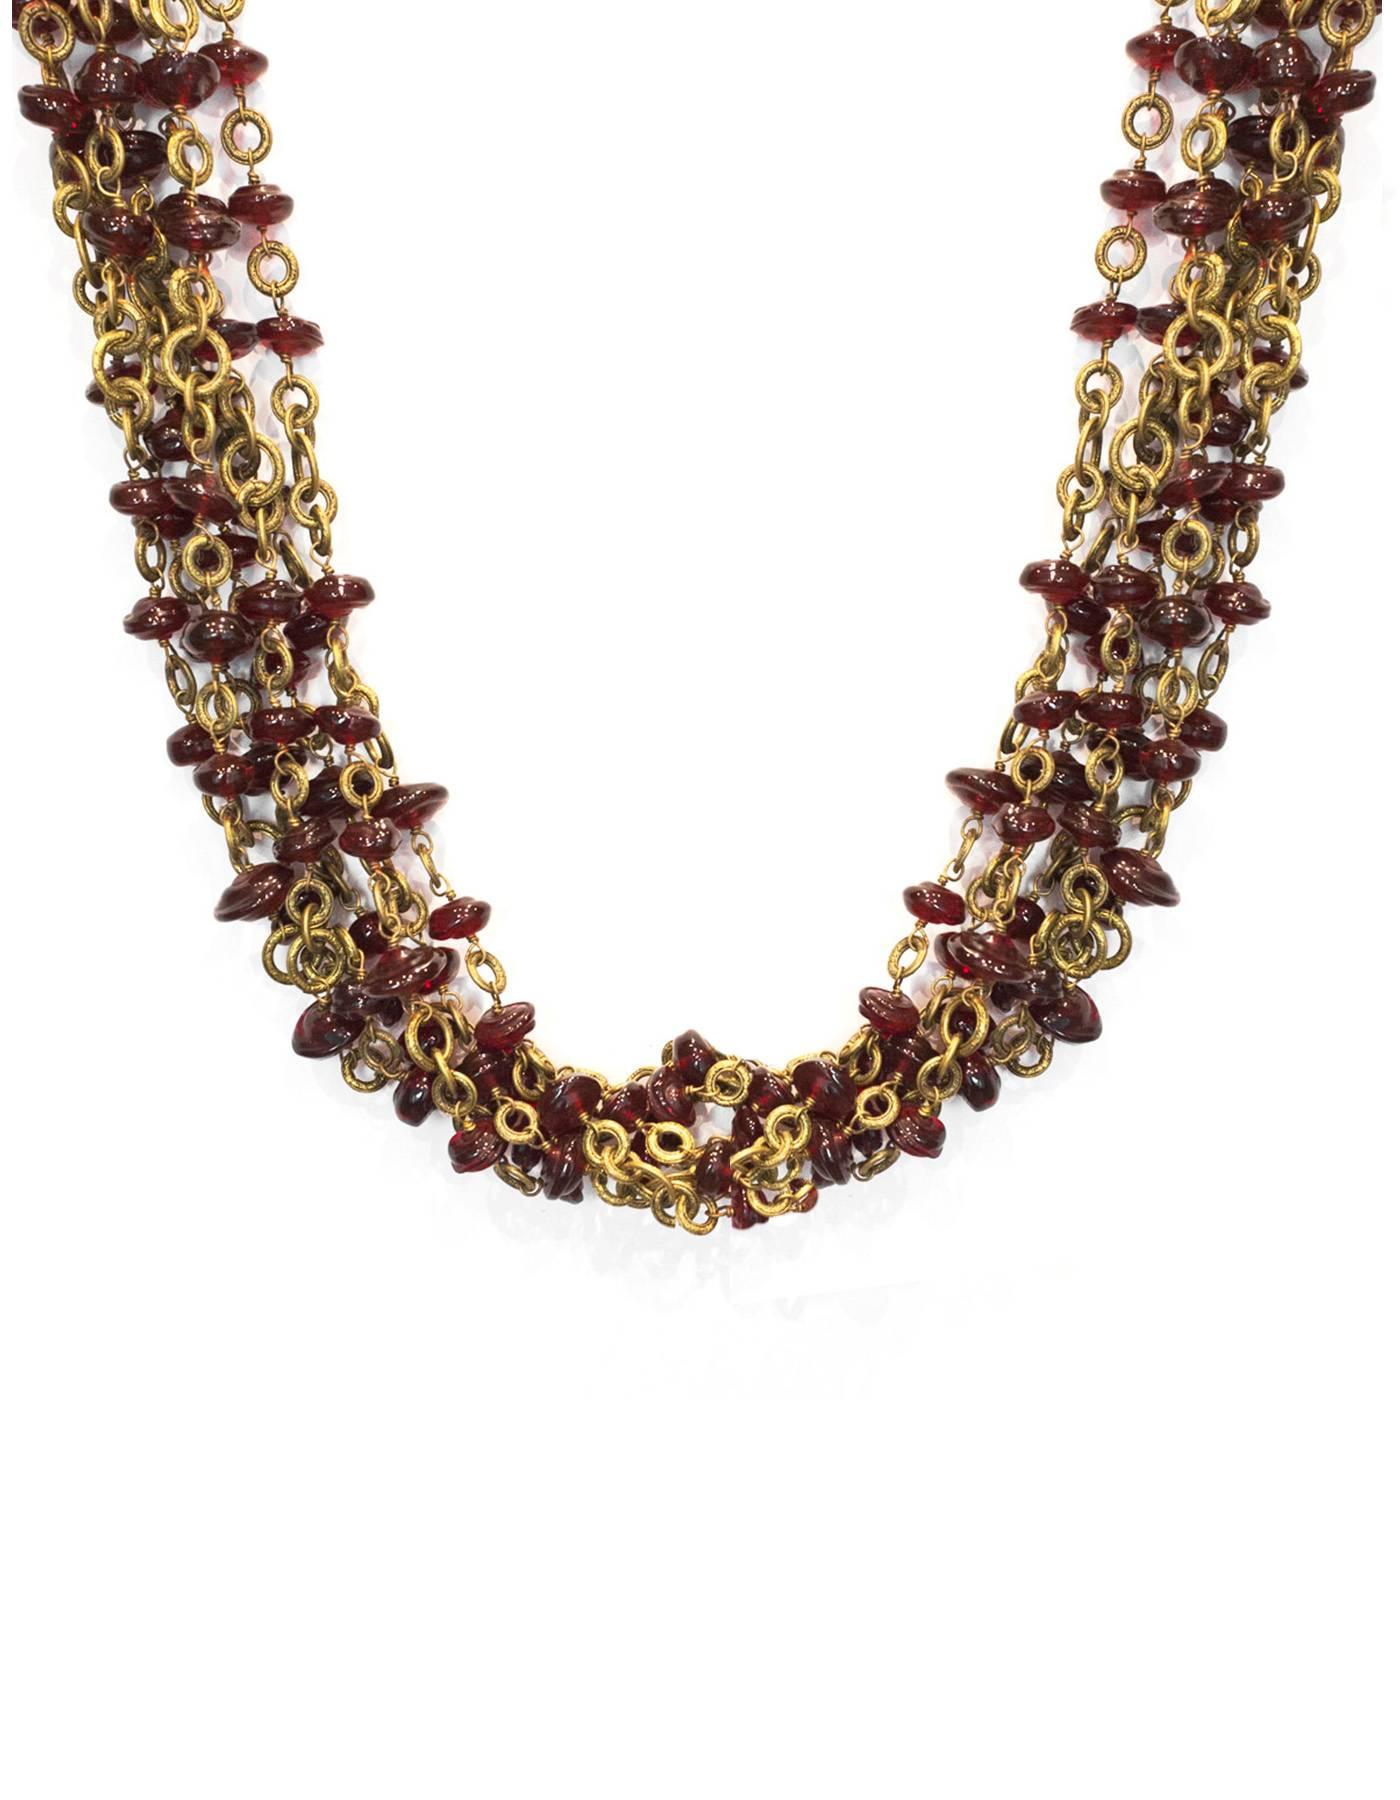 Chanel Vintage '84 Multi-Strand Red Gripoix Chain Link Necklace

Made In: France
Year of Production: 1984
Stamp: Chanel CC 1984
Closure: Antique clasp
Color: Red and goldtone
Materials: Metal and poured glass
Overall Condition: Excellent vintage